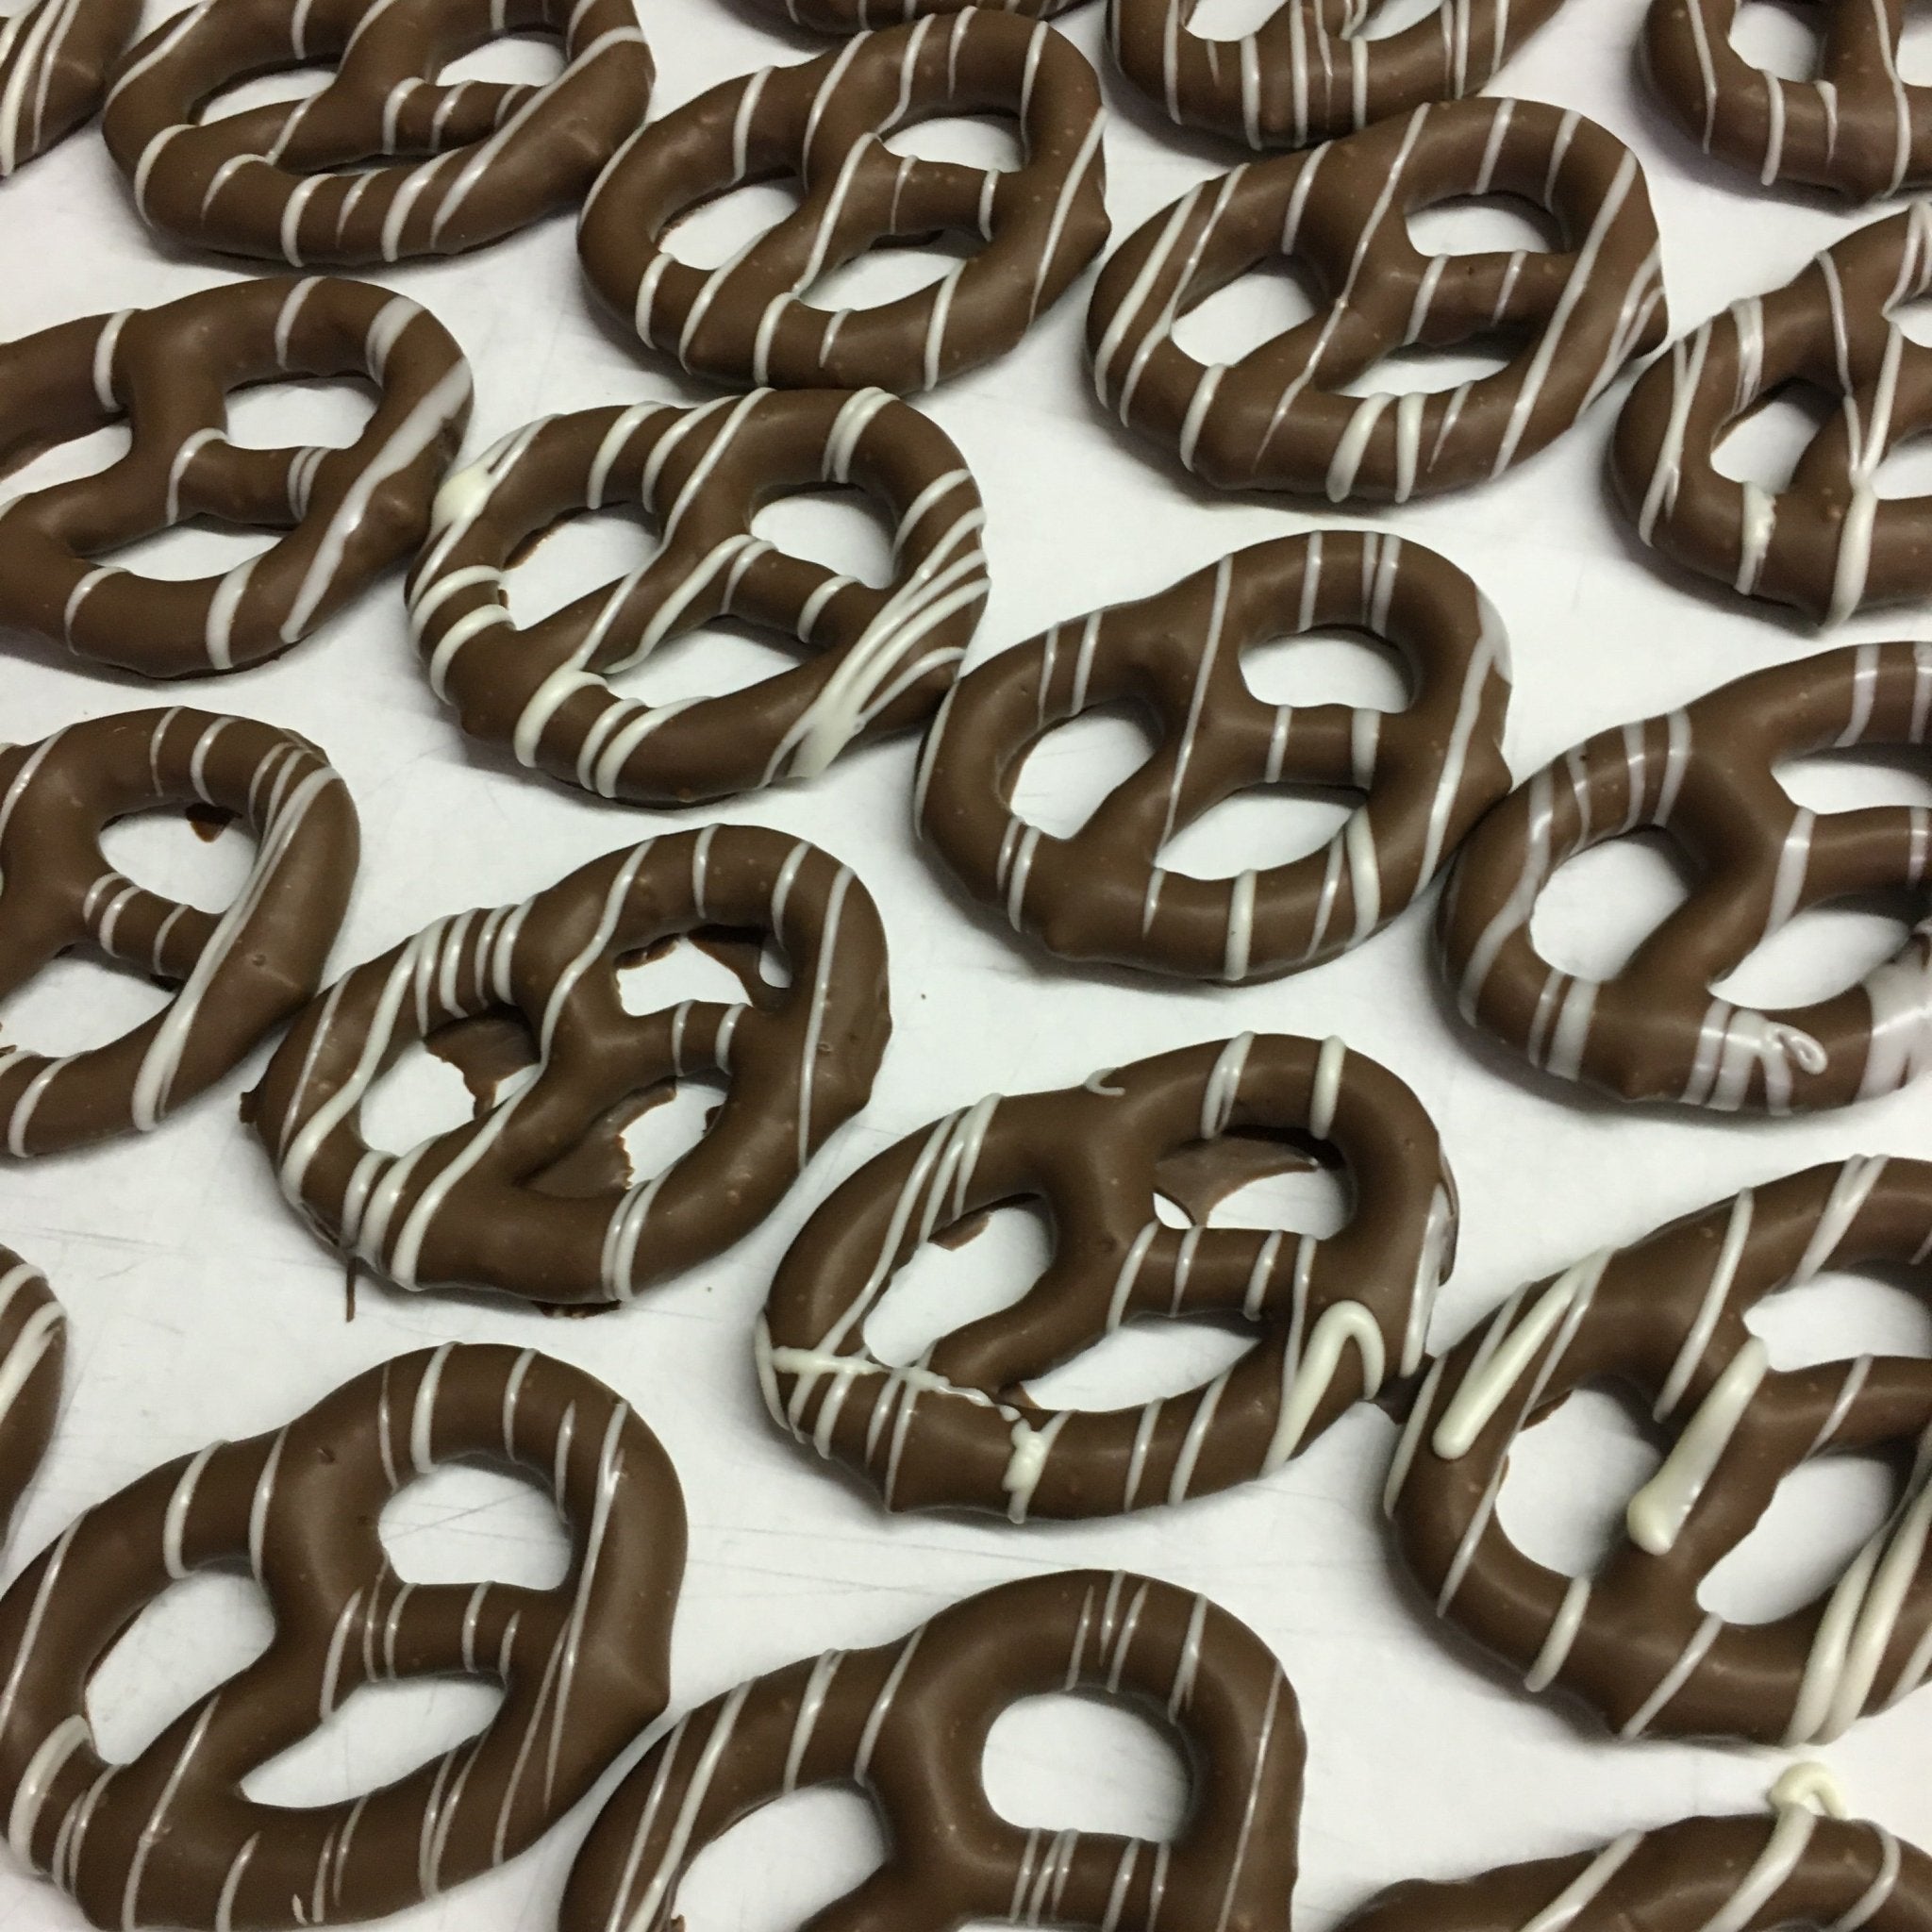 Chocolate Covered Pretzels - Nandy's CandyChocolate Covered Pretzels